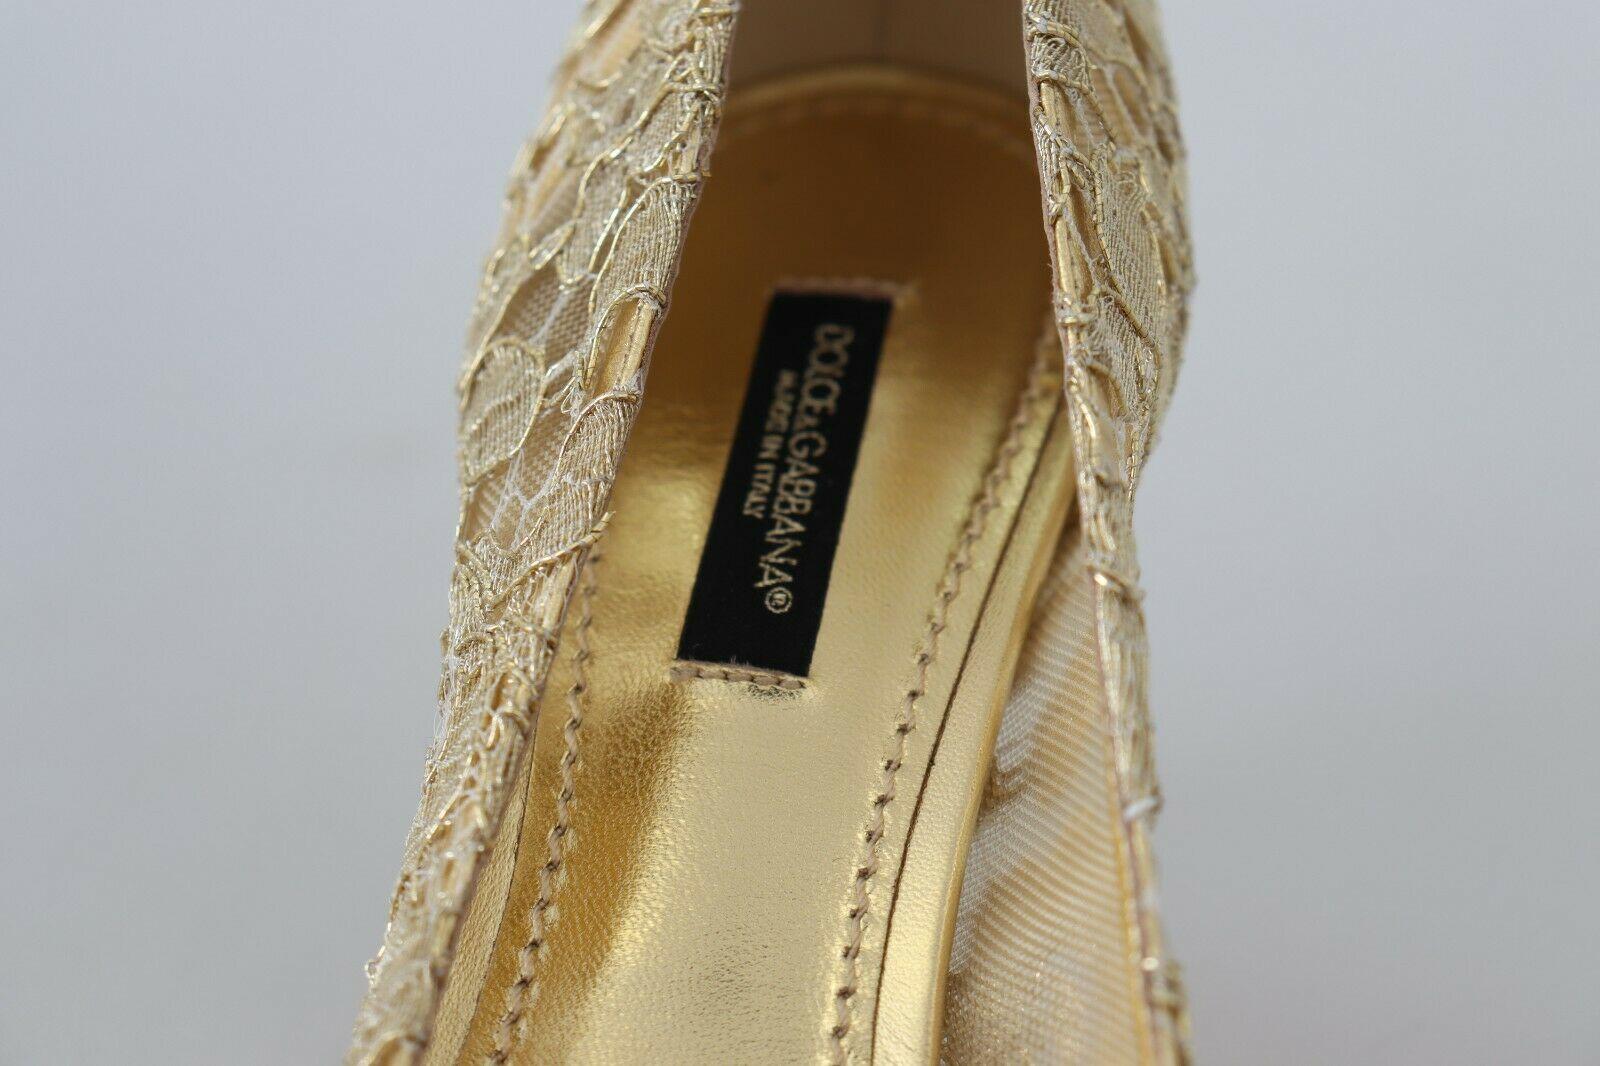 Dolce & Gabbana Gold Floral Lace Shoes Pumps Heels With DG Logo Jewels Crystals 2